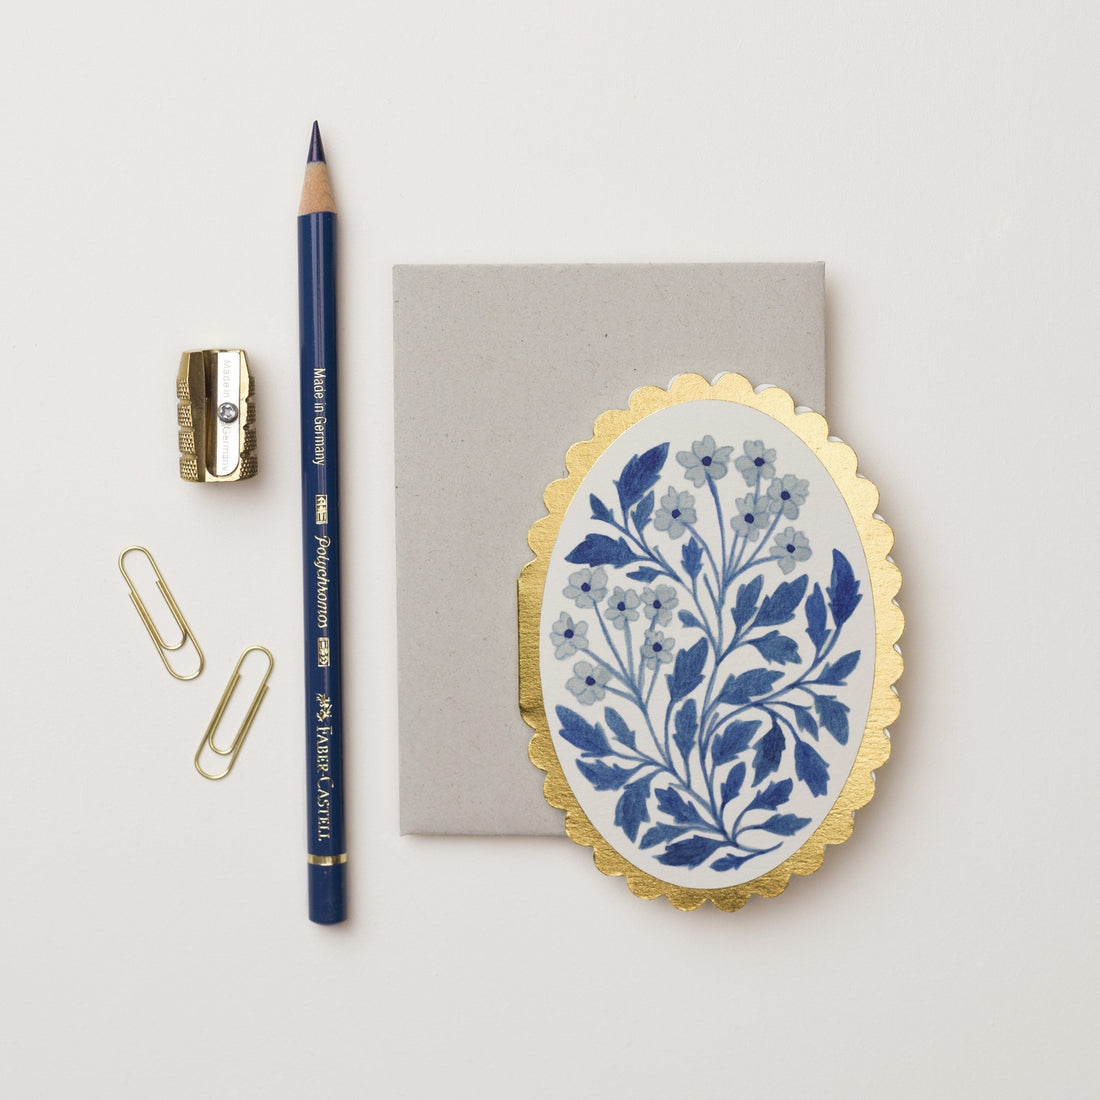 Flat lay of stationery including a pencil, sharpener, paper clips, and a notebook with a floral design alongside Wanderlust Paper Co mini greeting cards on a white background.